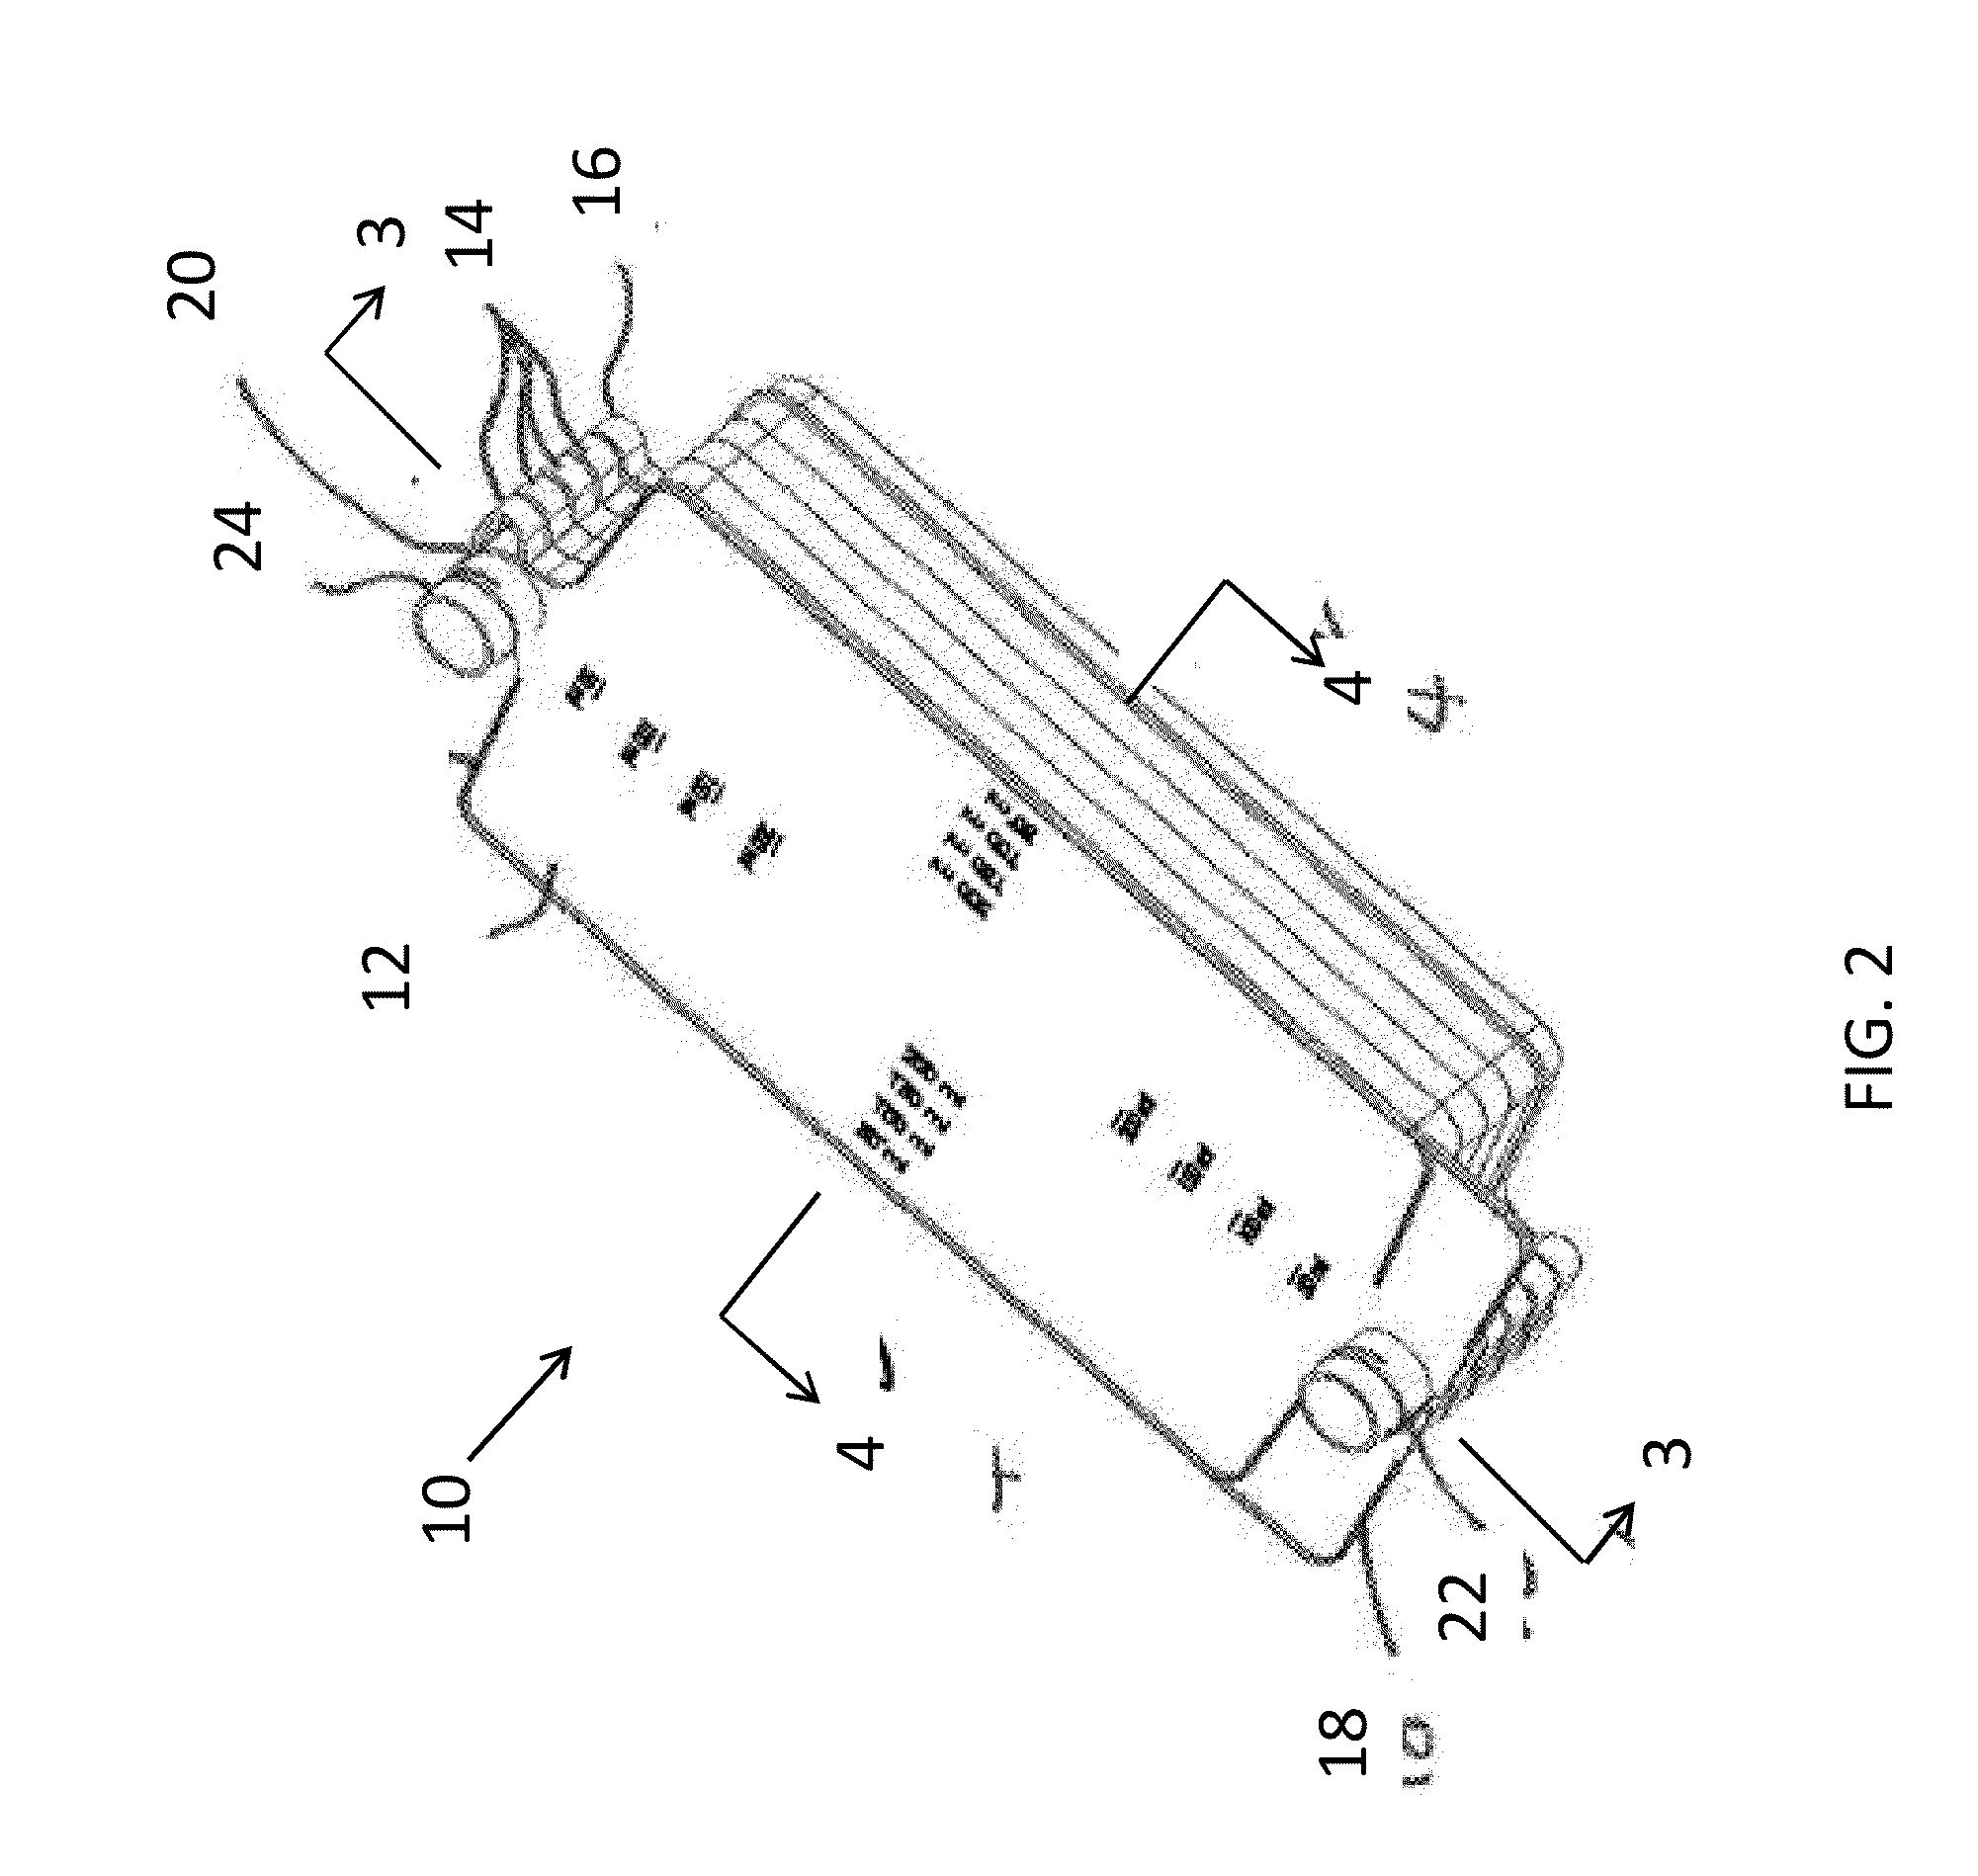 Multi-layered cell culture vessel with manifold grips